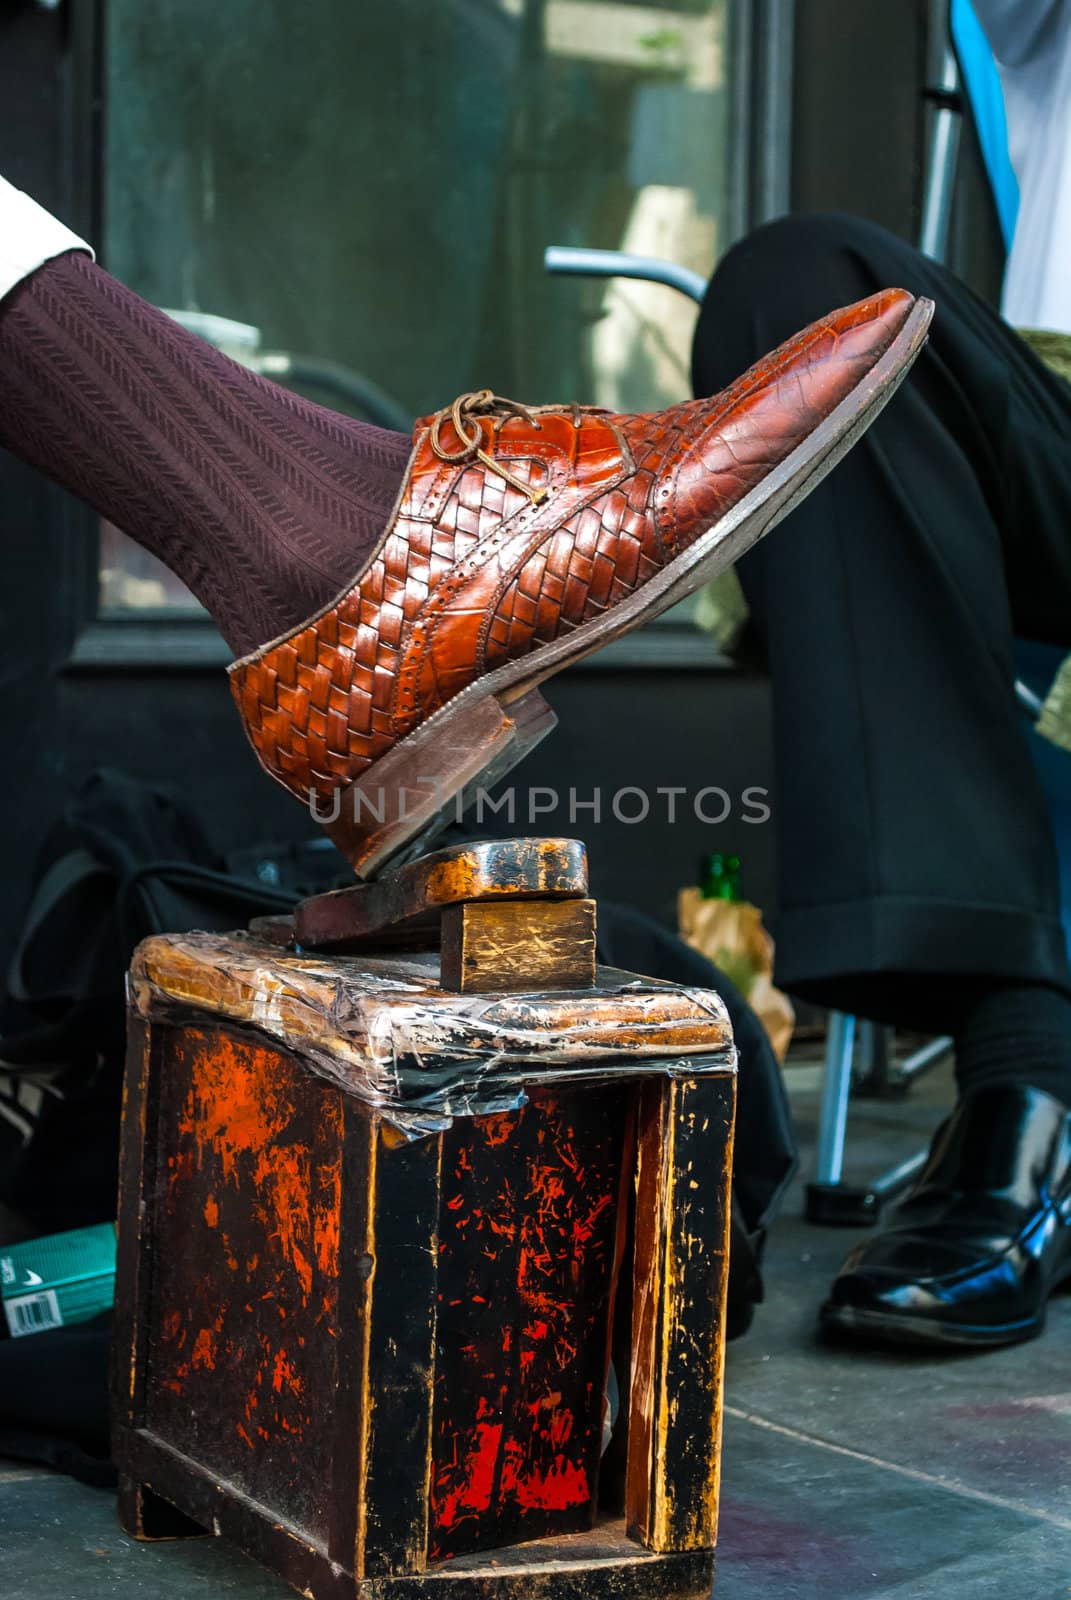 Photograph of a Shoeshiners own shoe on his shining stand waiting for customers.